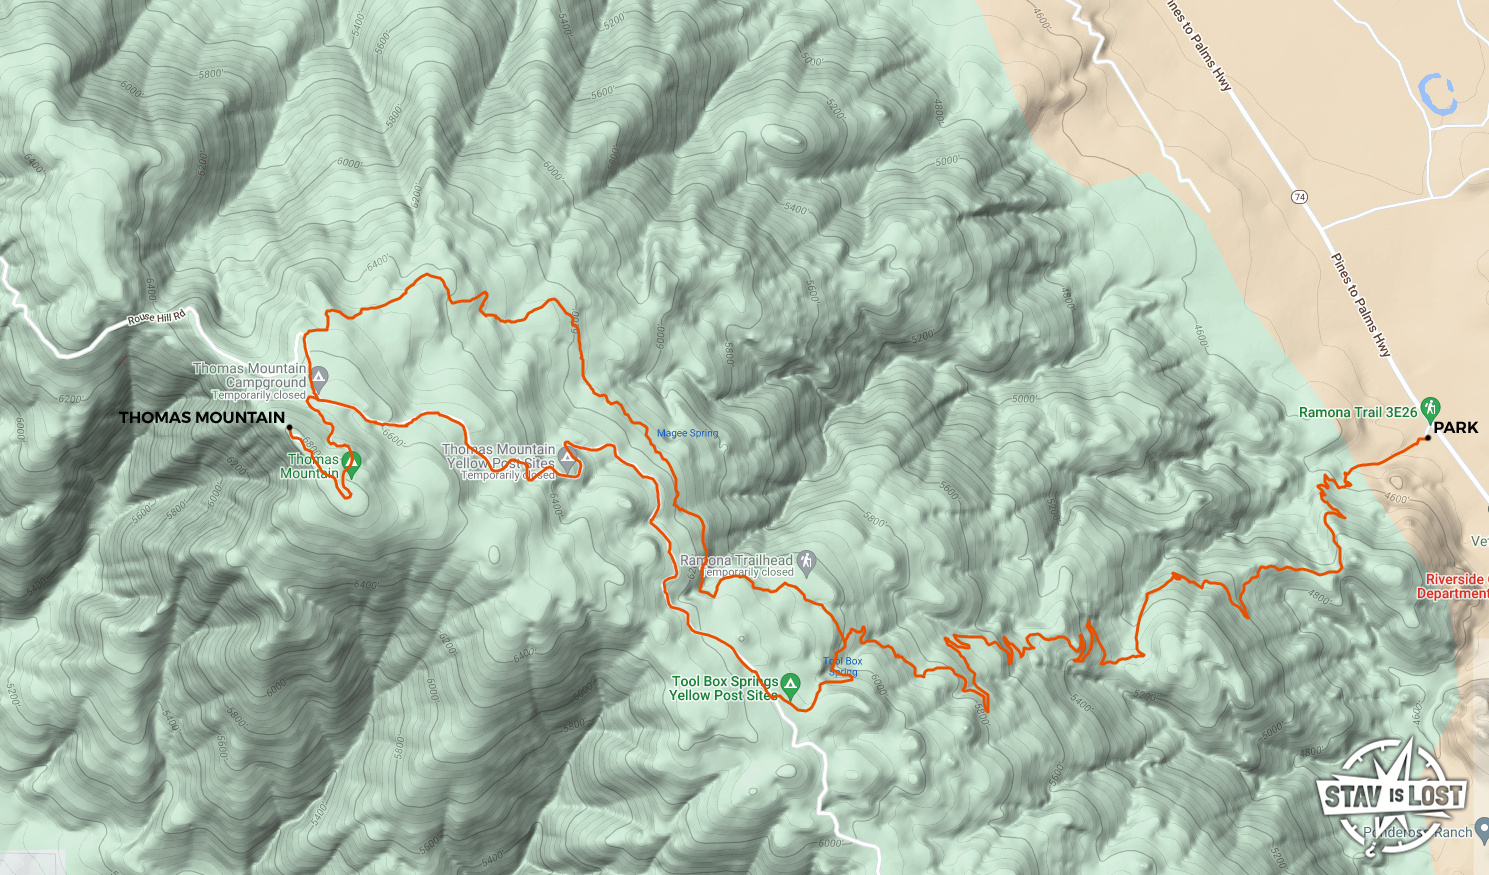 map for Thomas Mountain via Ramona Trail by stav is lost